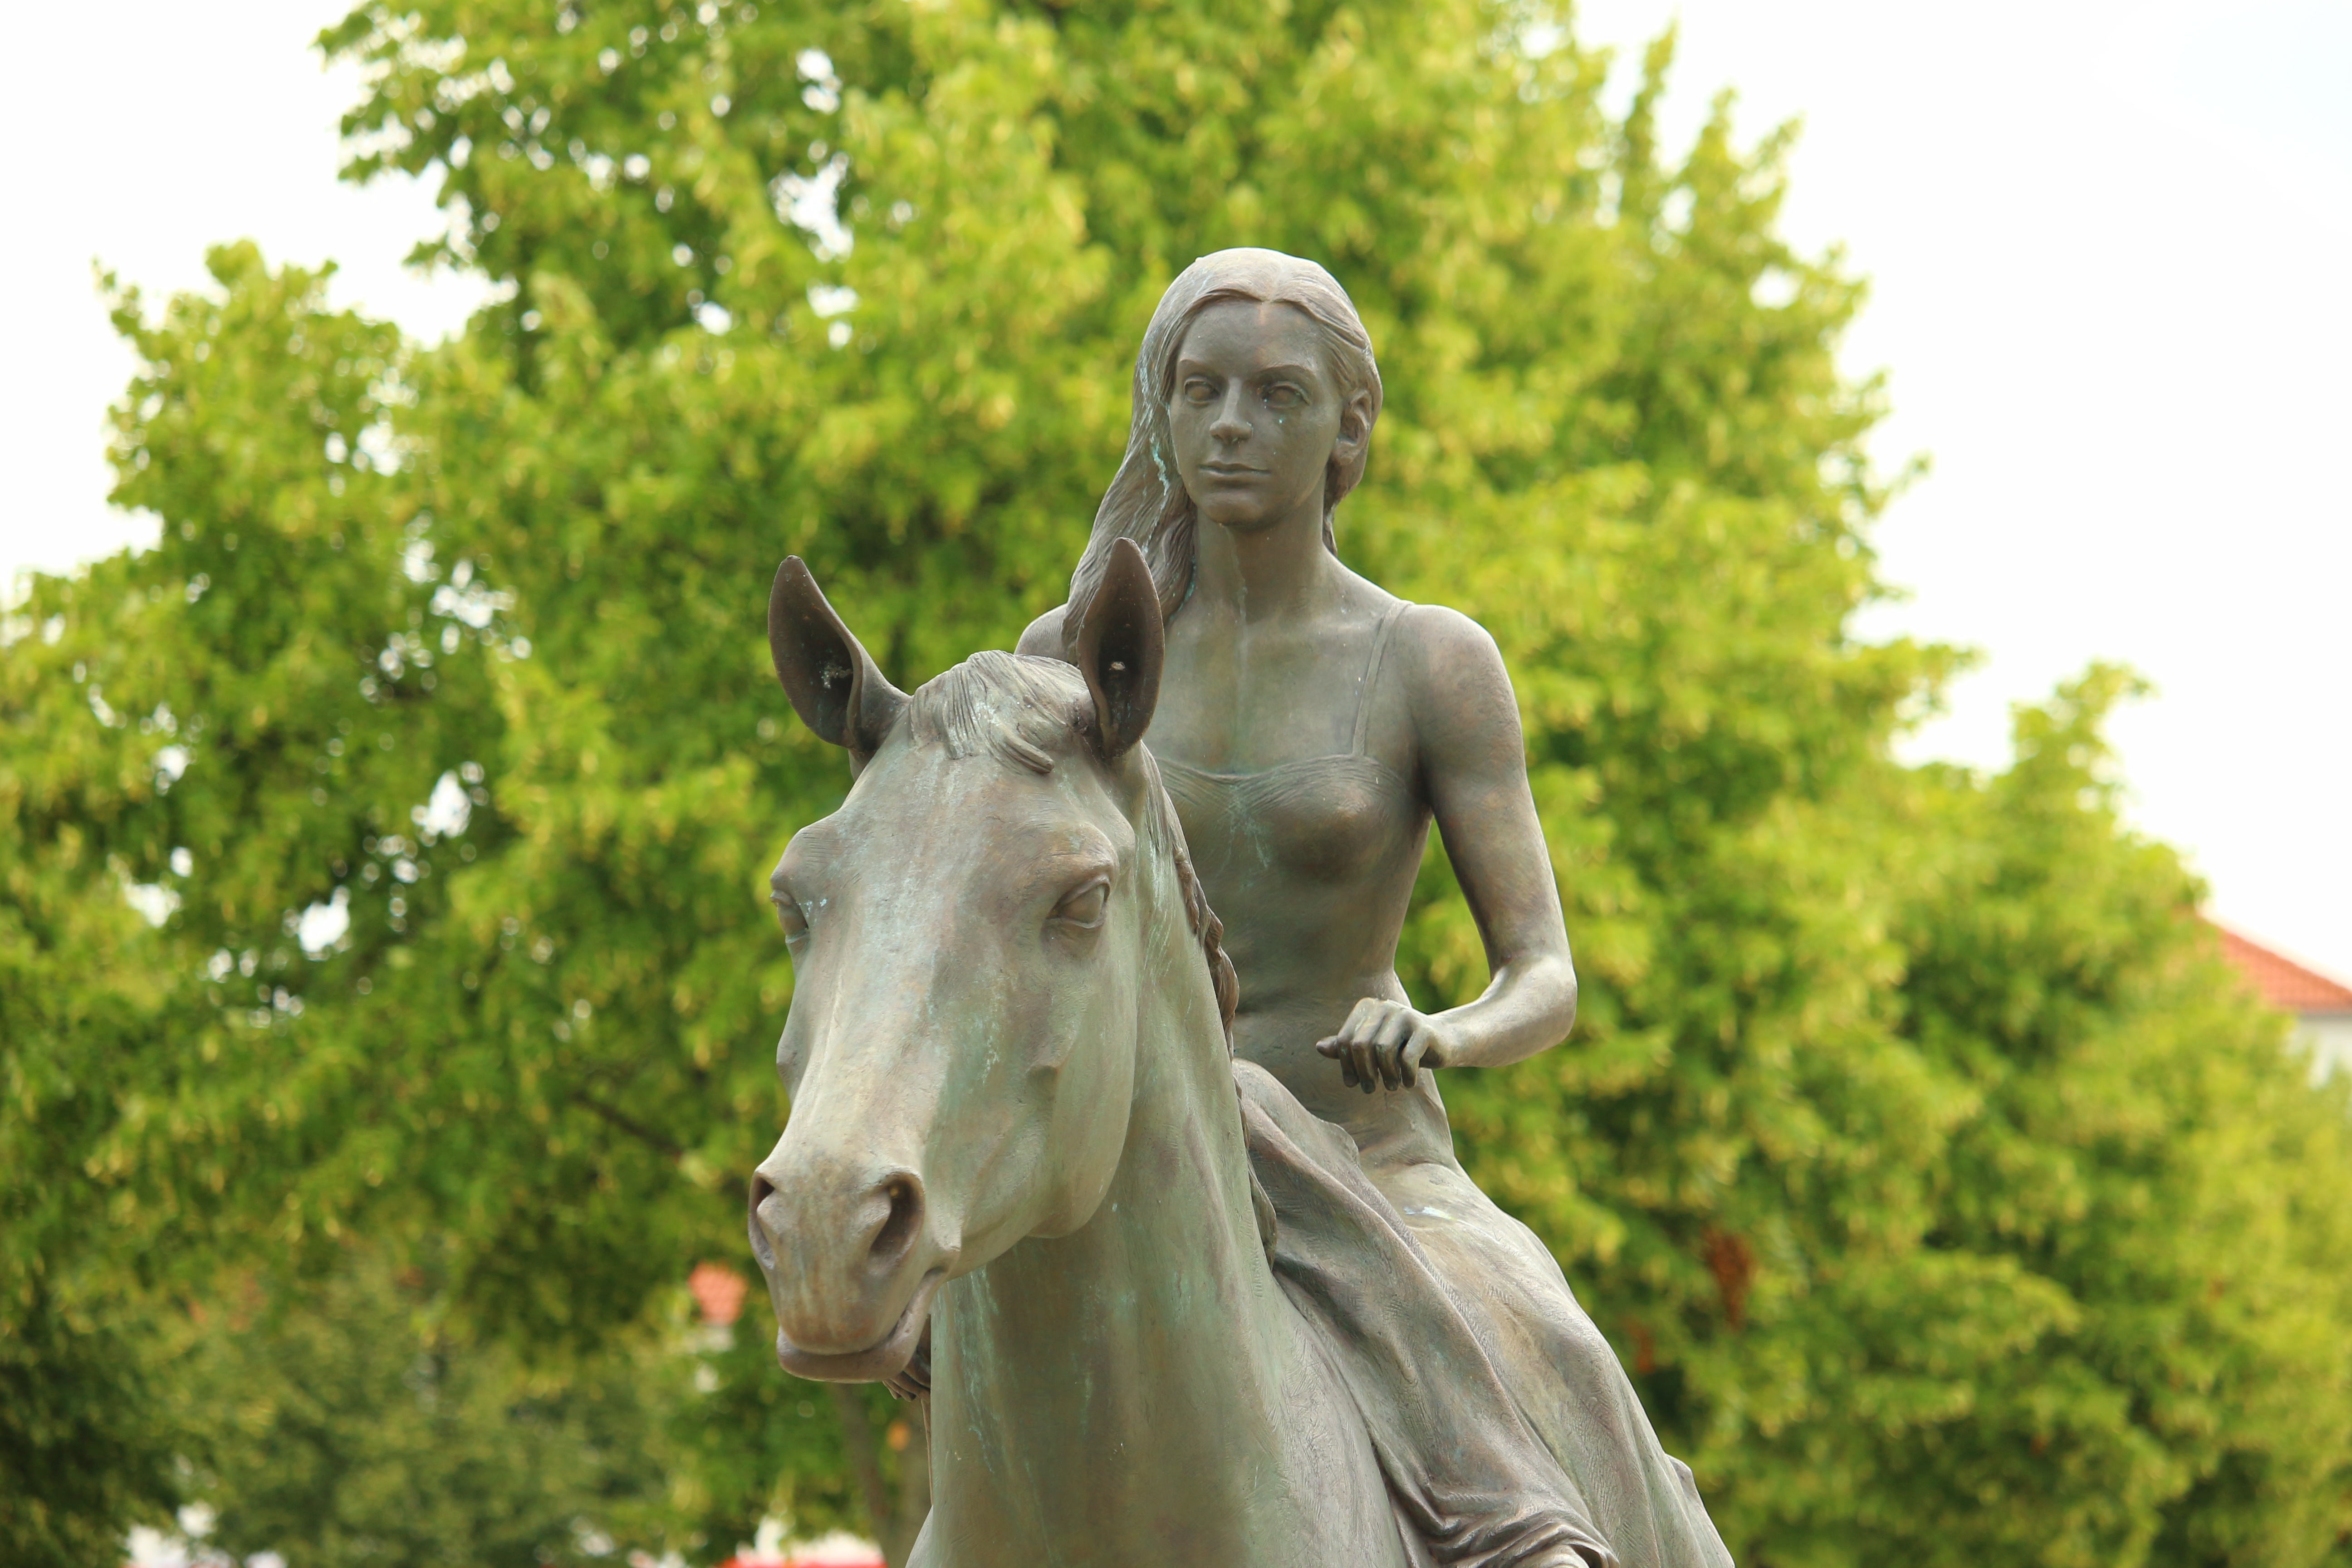 Woman riding on a horse statue